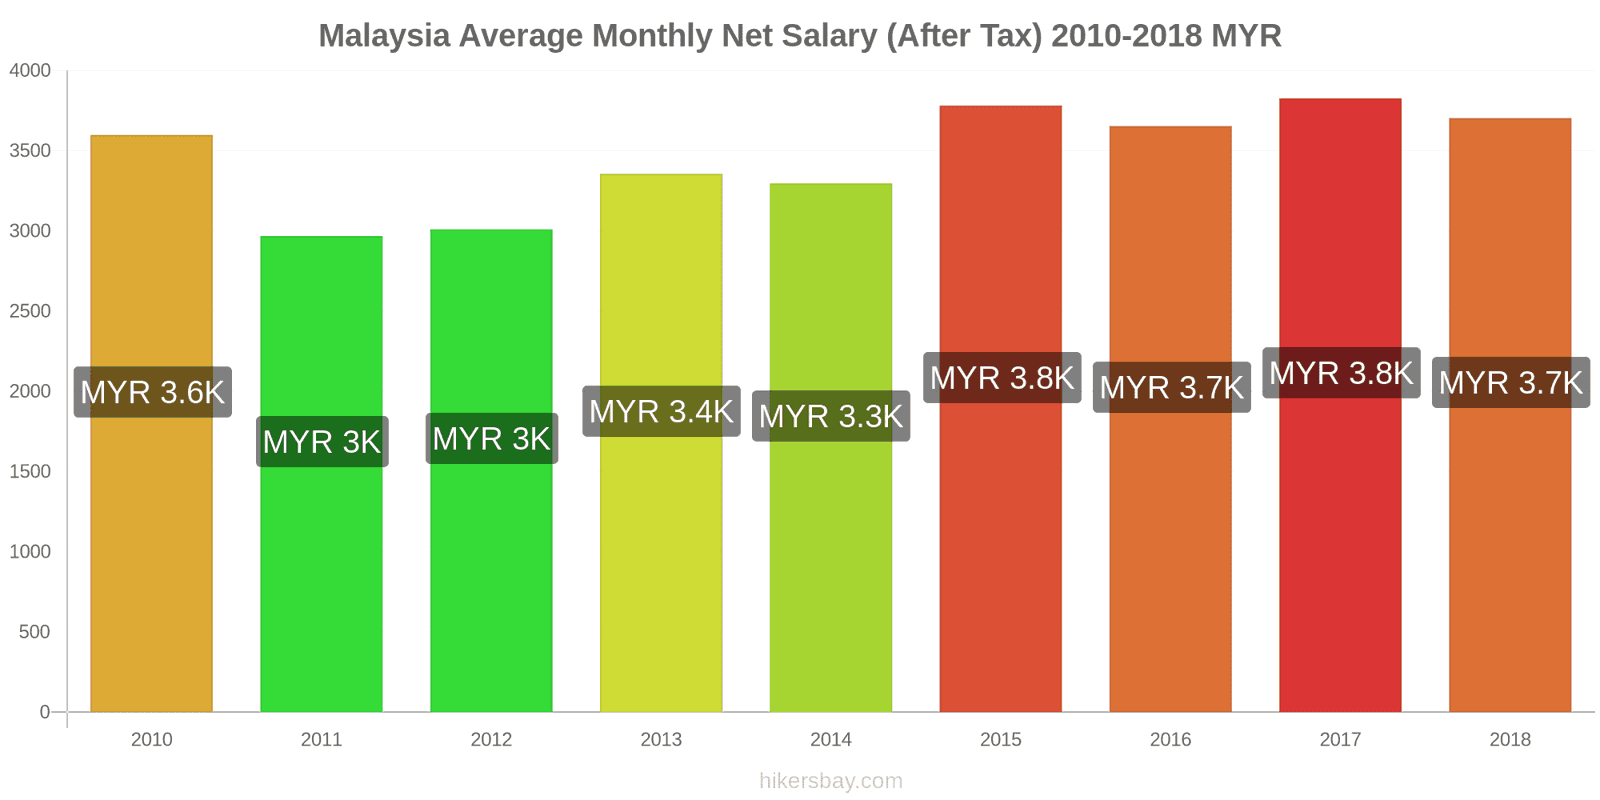 Malaysia price changes Average Monthly Net Salary (After Tax) hikersbay.com